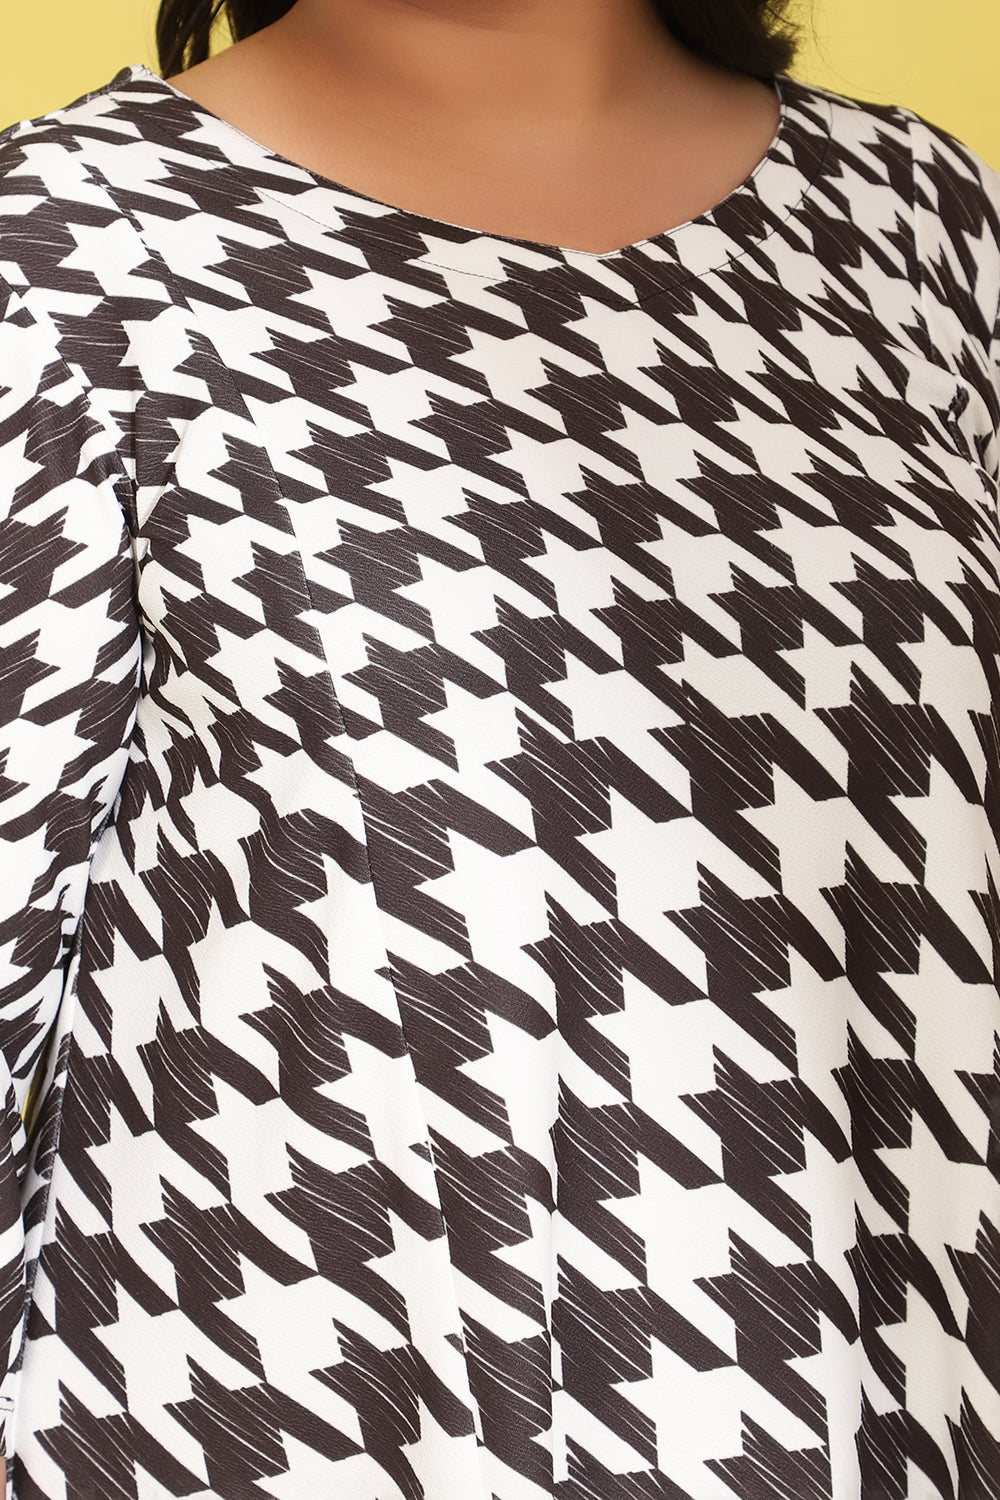 Plus Size Monochrome Houndstooth Printed Dress